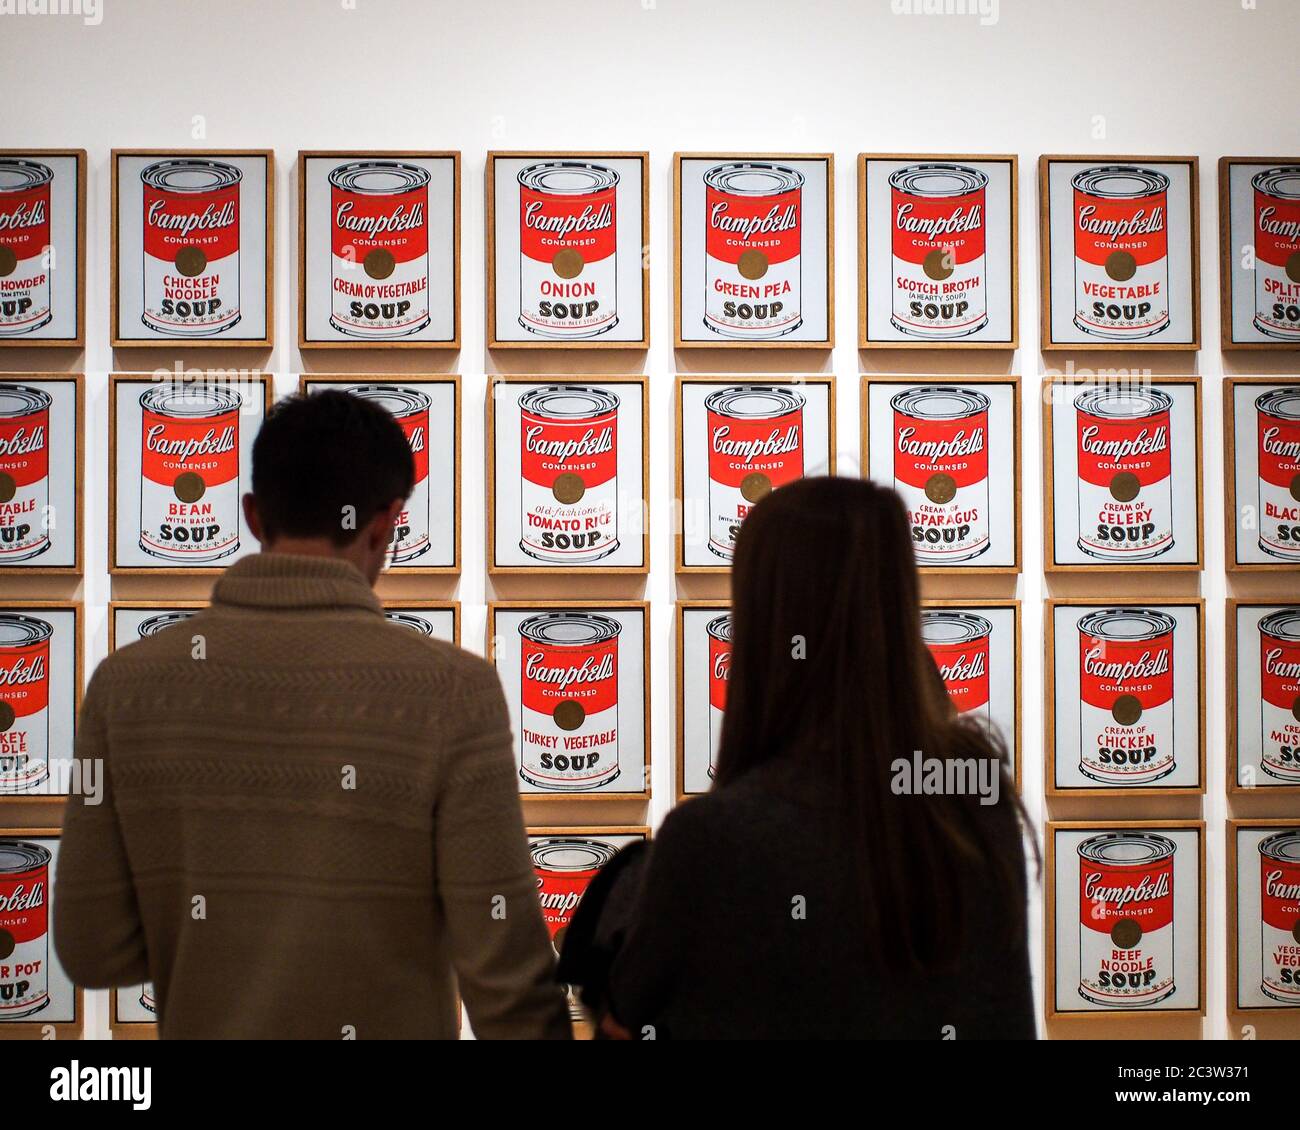 Museum of Modern Art, or MoMA, Manhattan, New York, United States of America - Campbell's Soup Cans, the artwork by Andy Warhol. Famous pop artist. Stock Photo